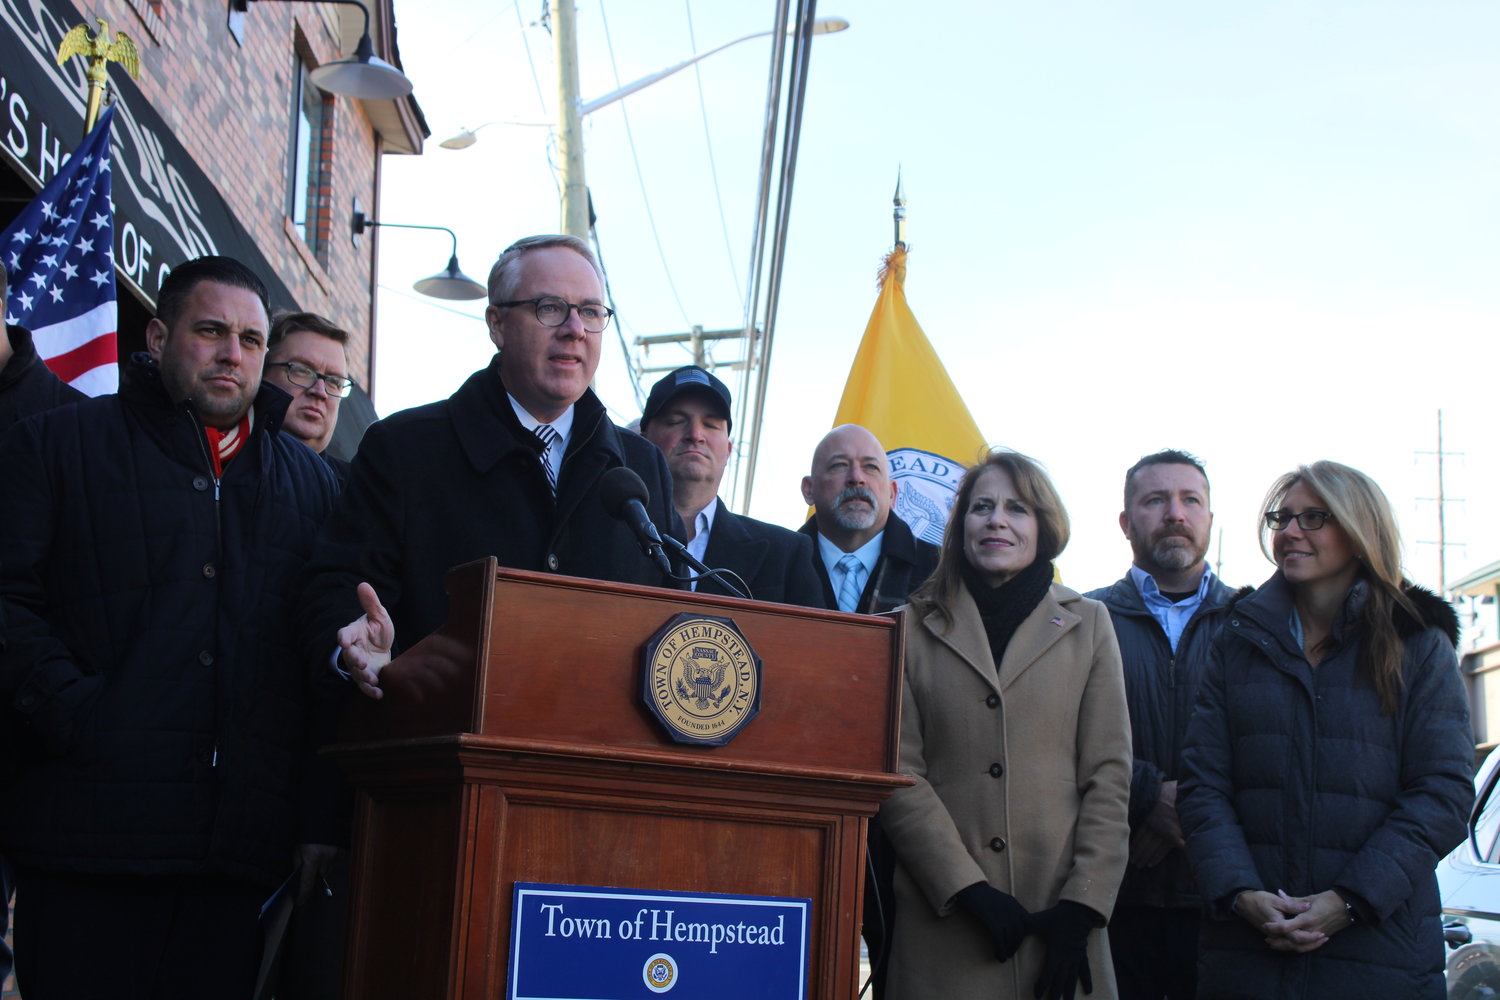 On Jan. 12, Town of Hempstead Supervisor Don Clavin announced an upcoming fundraiser at Mulcahy's Pub and Concert Hall in Wantagh to benefit fallen or injured law enforcement officers and their families.